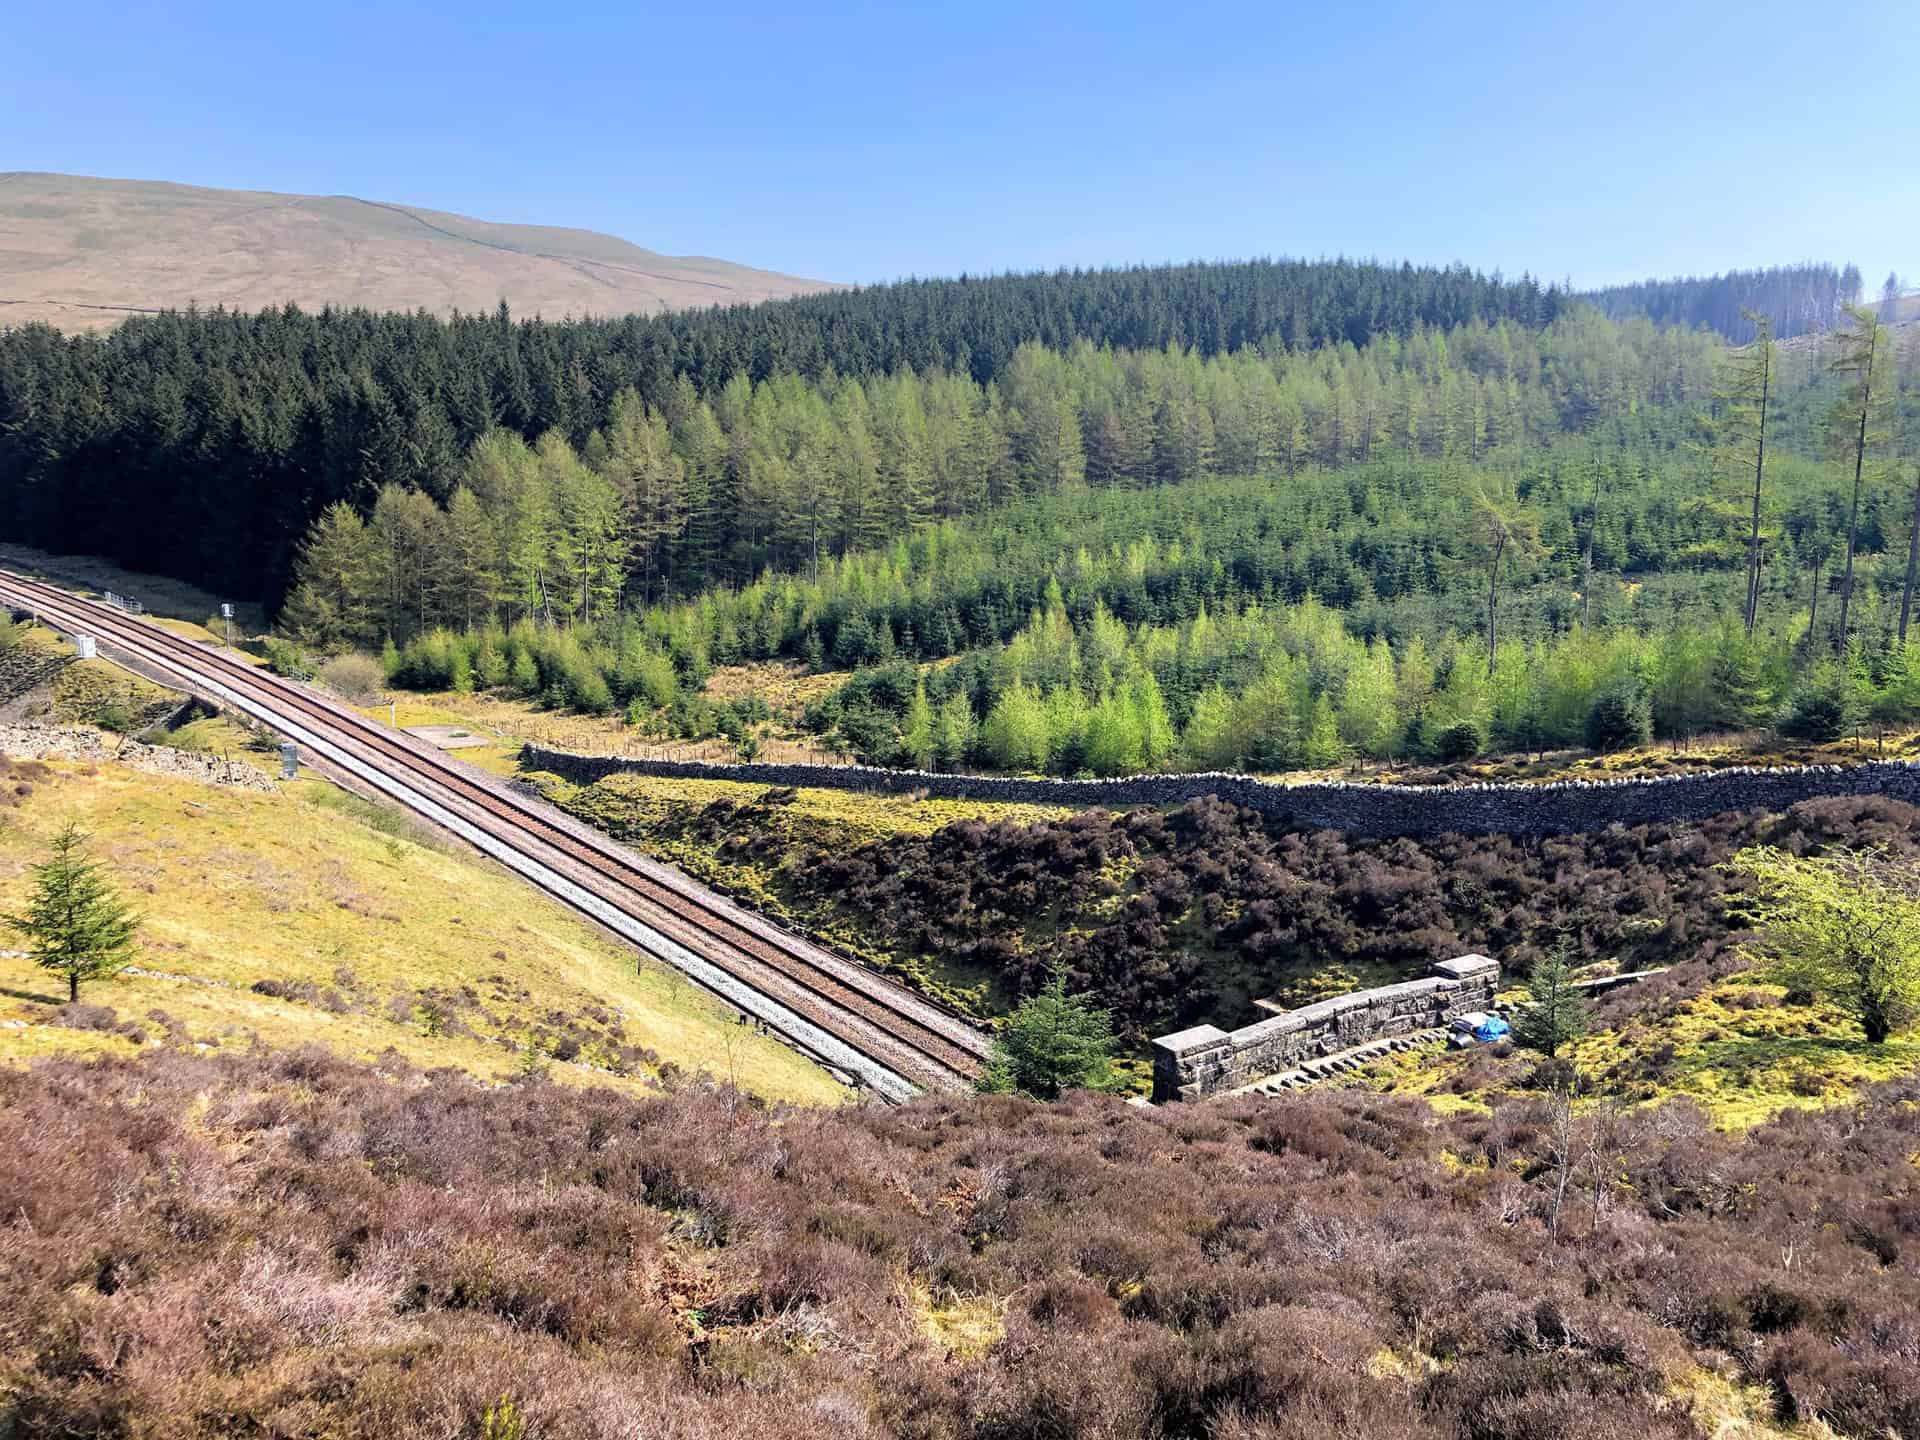 The Settle to Carlisle railway line at the northern entrance of Bleamoor Tunnel.